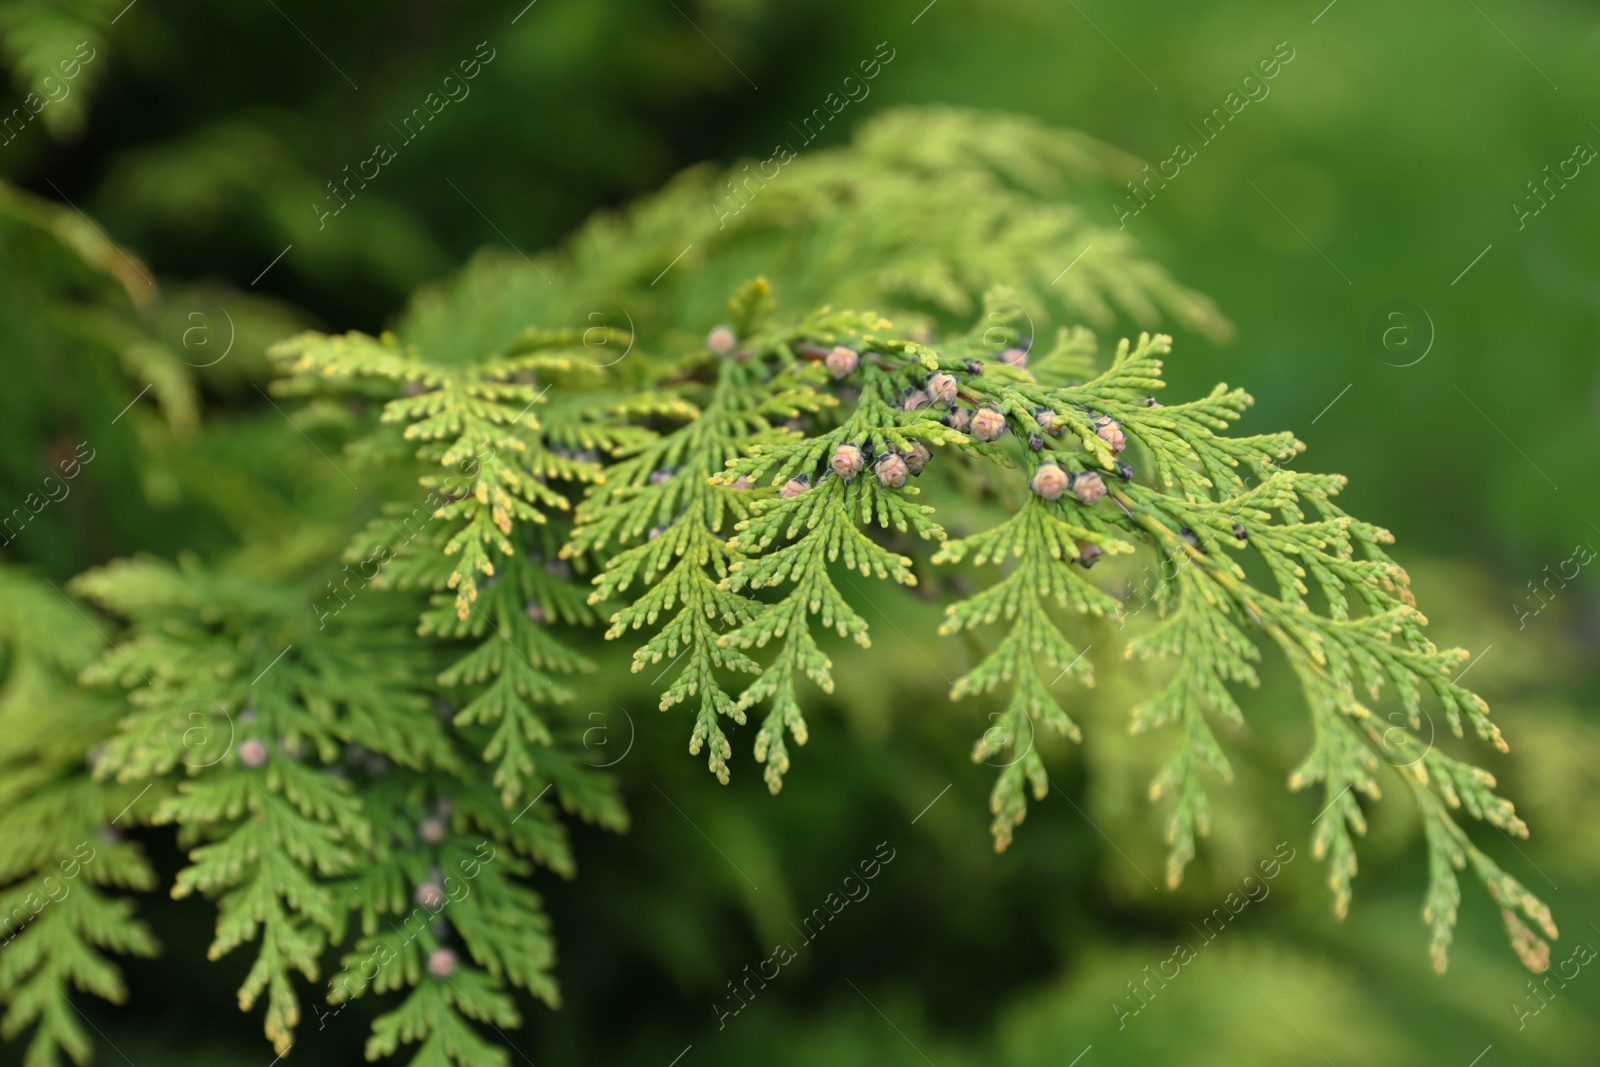 Photo of Green branches of beautiful thuja tree outdoors, closeup